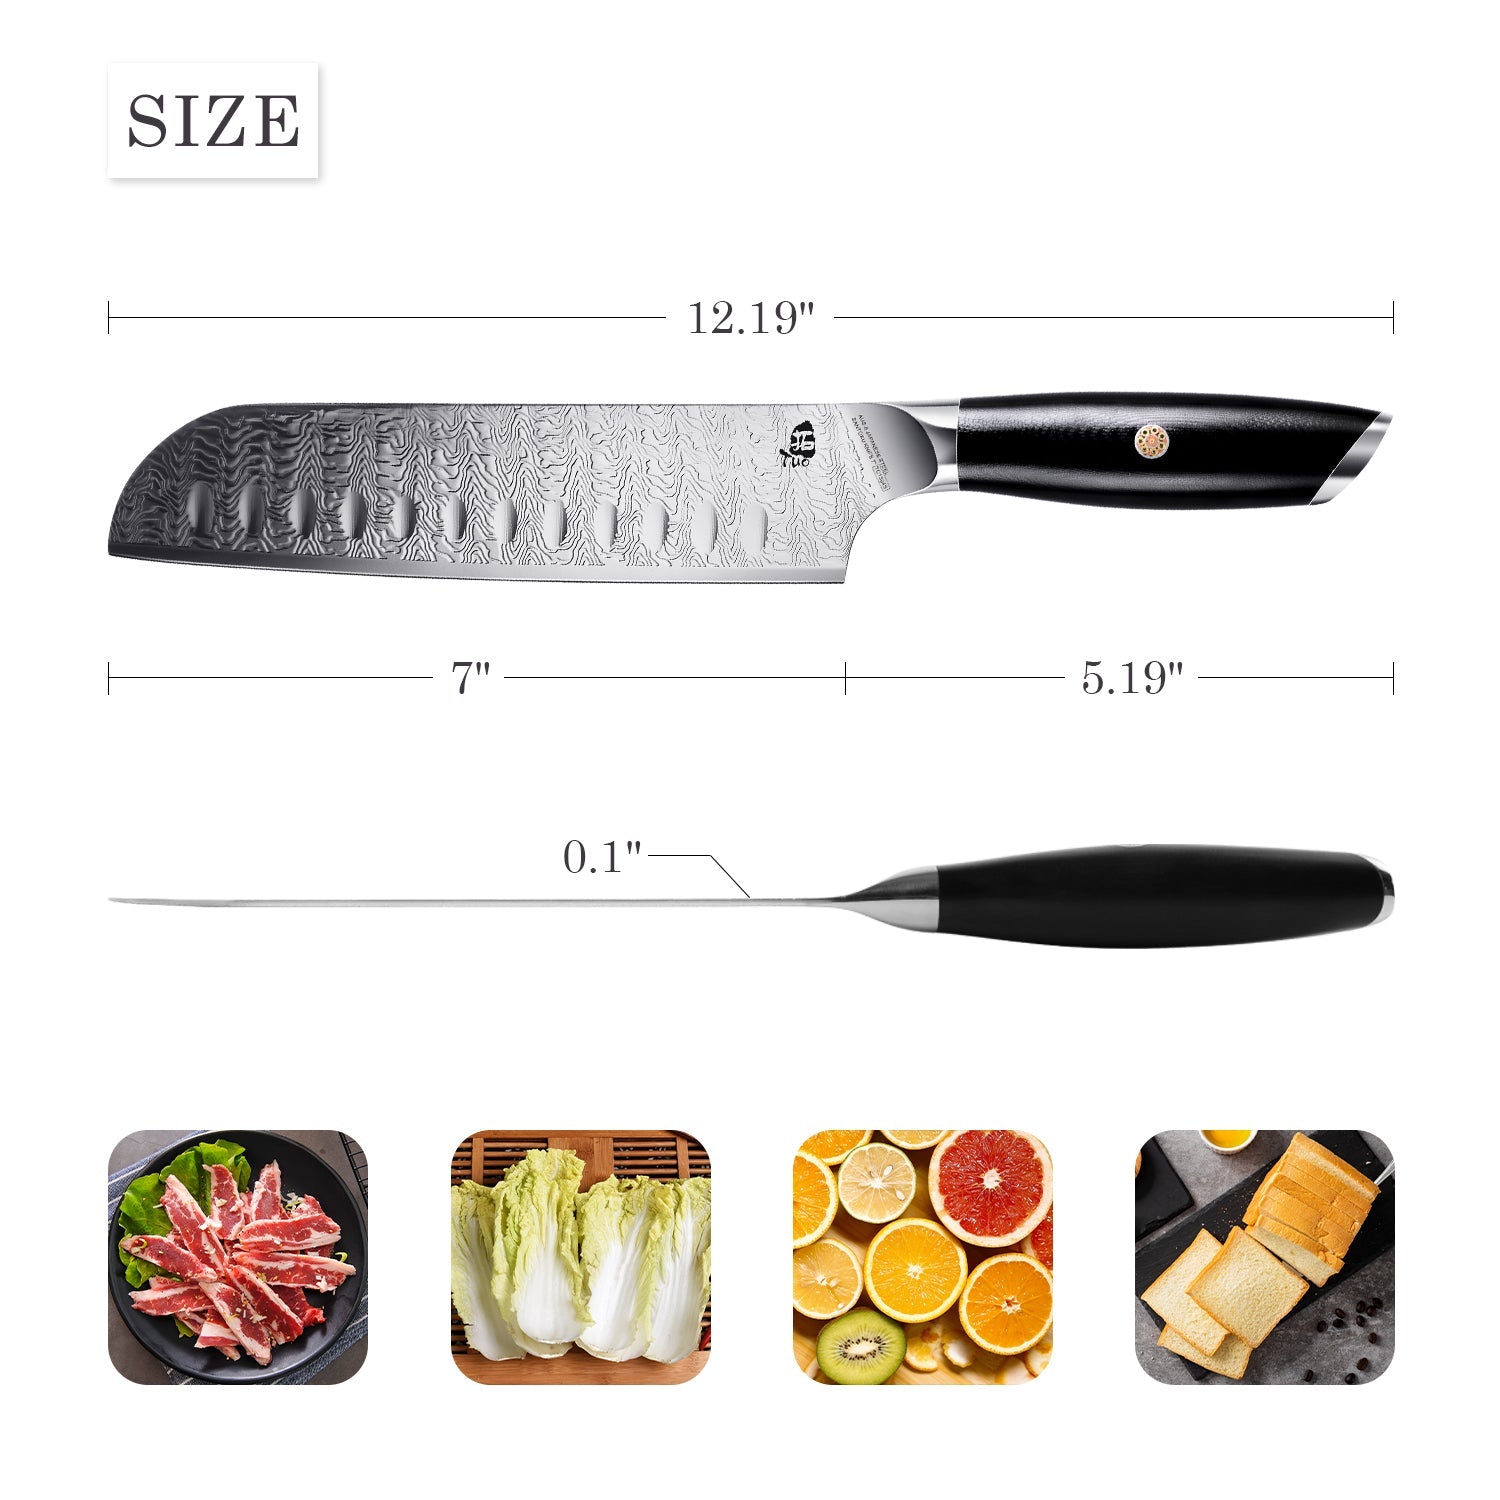 TUO 7 inch Santoku Knife, Japanese Chef Knife Vegetable Meat